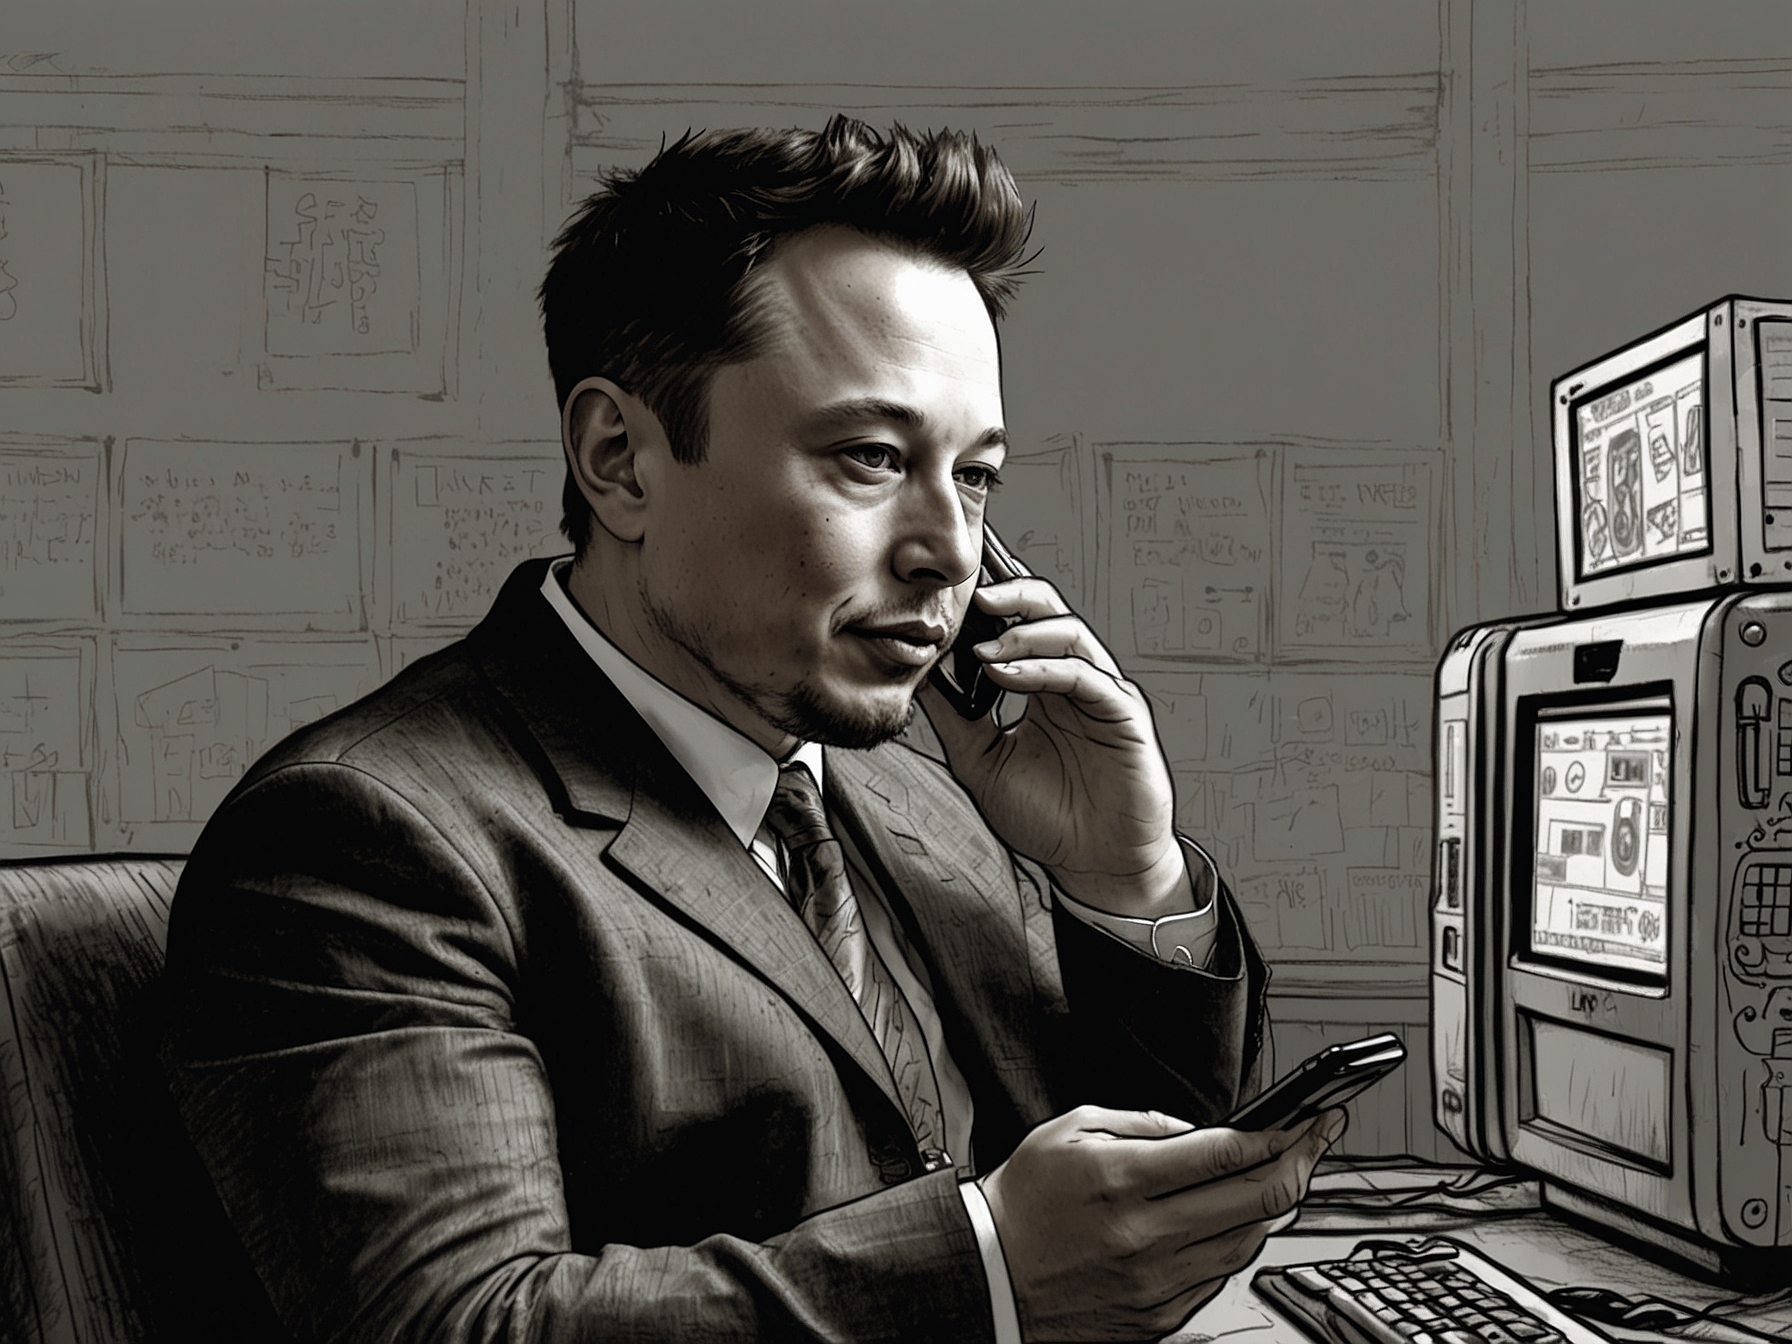 A depiction of Elon Musk tweeting on his phone, with a significant following reacting and discussing the potential for electronic voting machine hacking, highlighting the digital spread of the controversy.